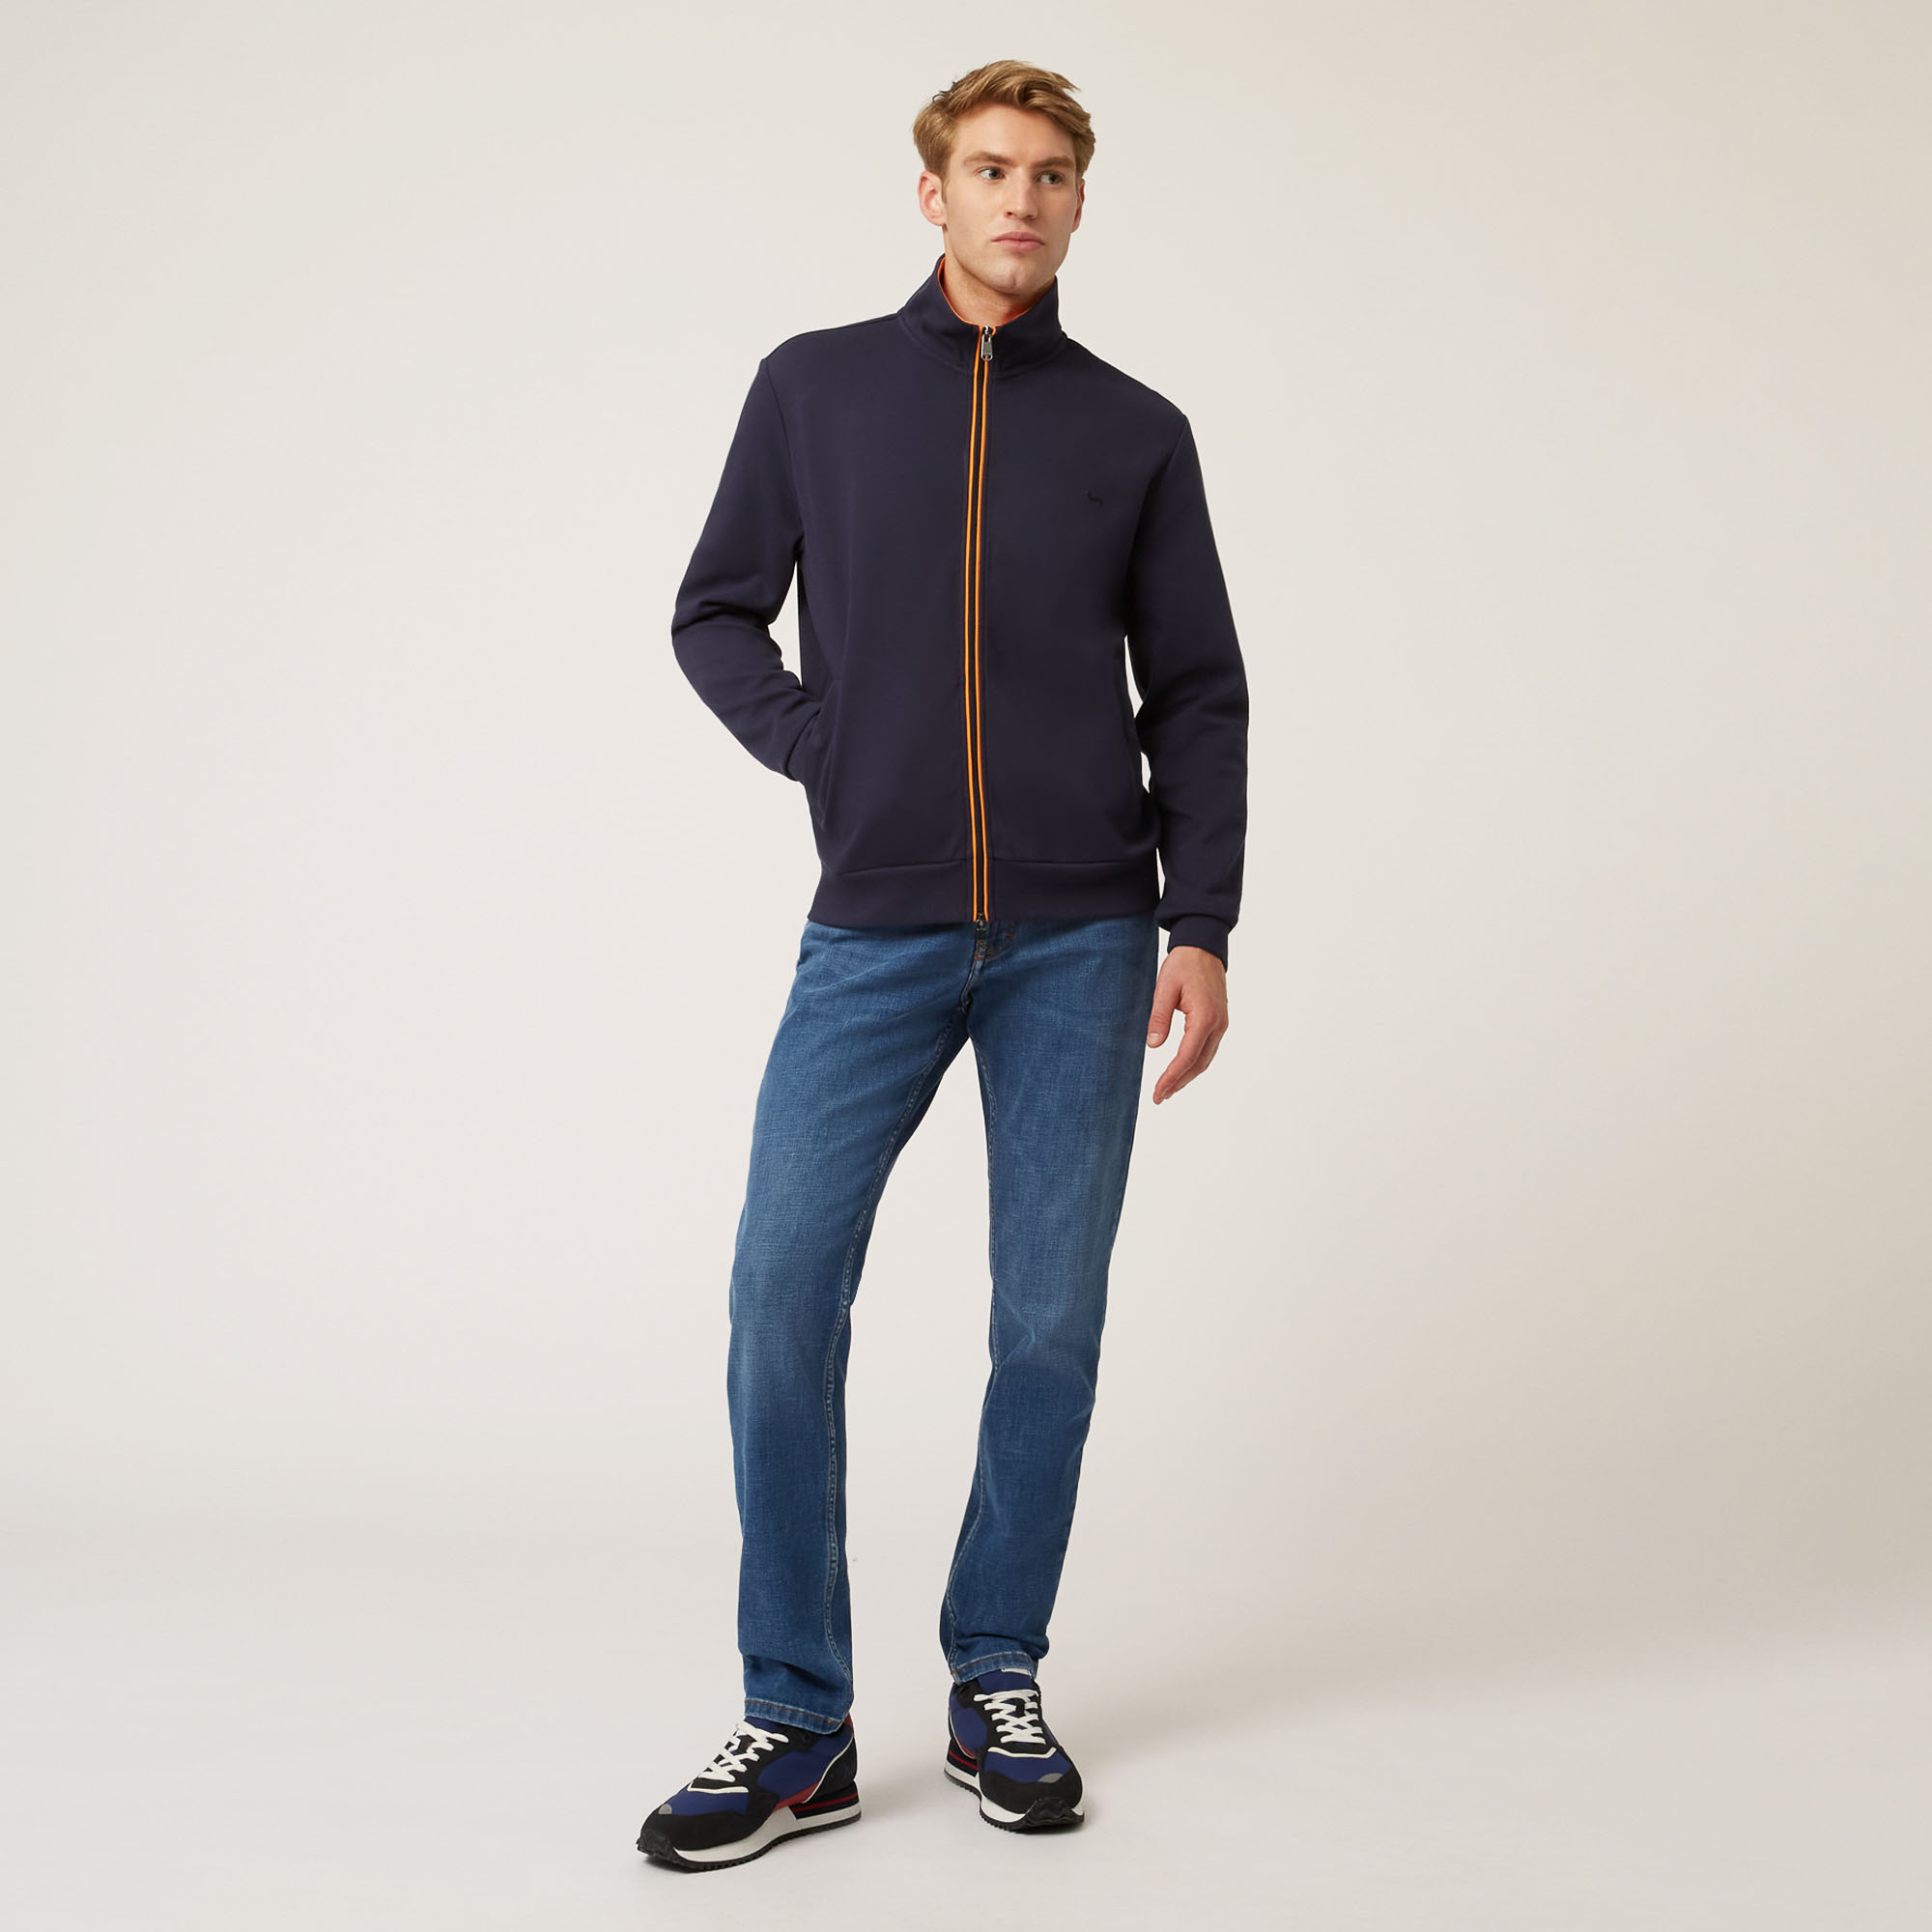 Felpa Full Zip Con Piping A Contrasto, Blu Navy, large image number 3